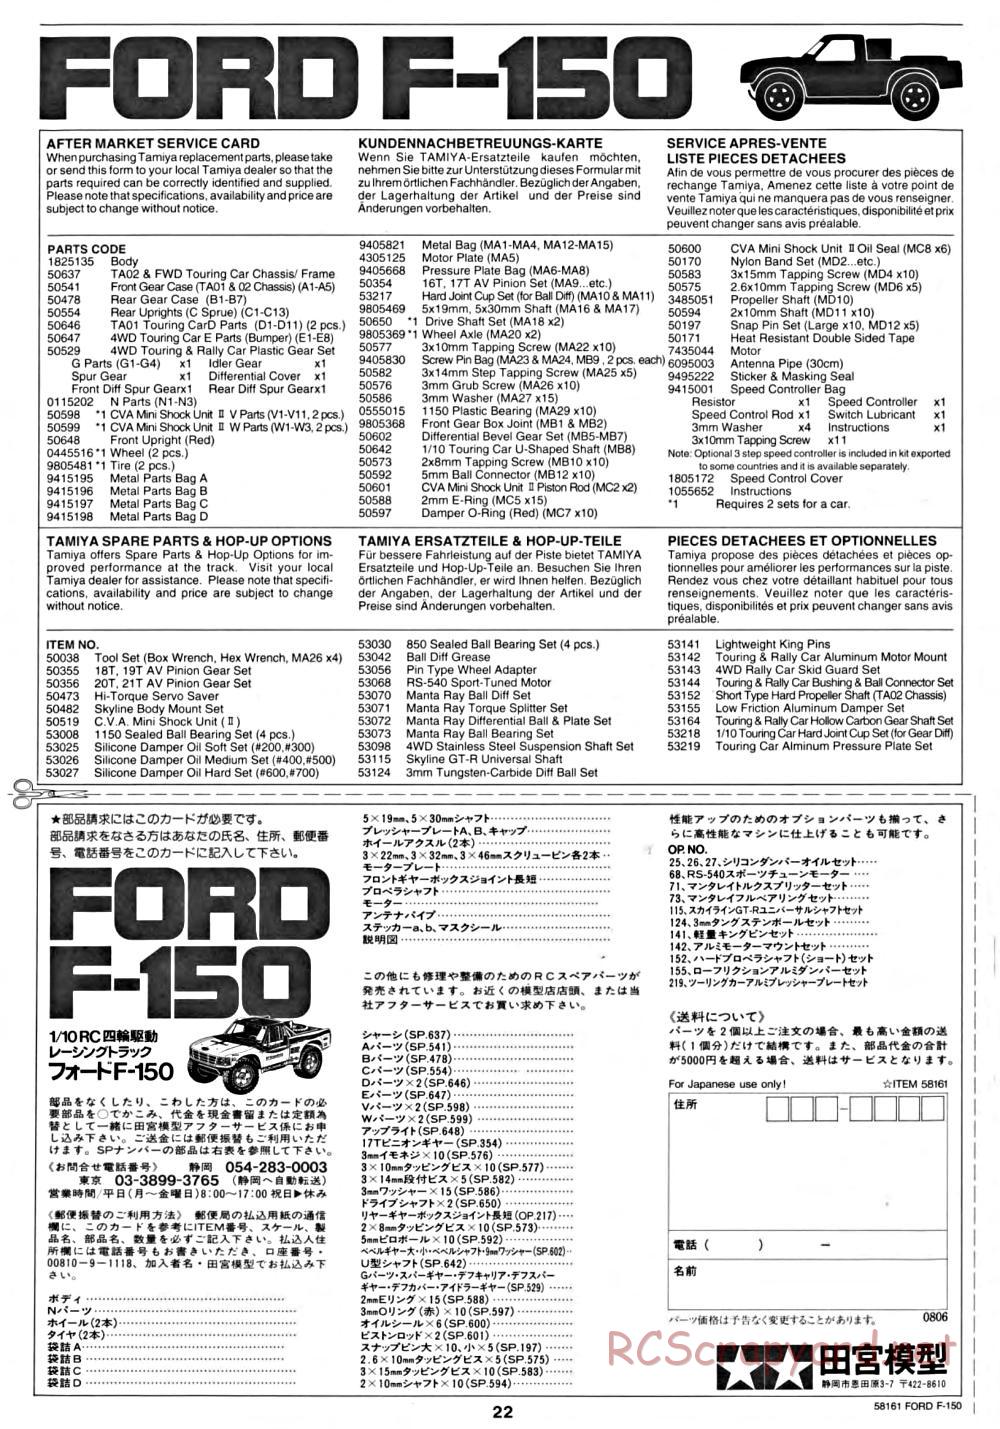 Tamiya - Ford F-150 Truck Chassis - Manual - Page 22